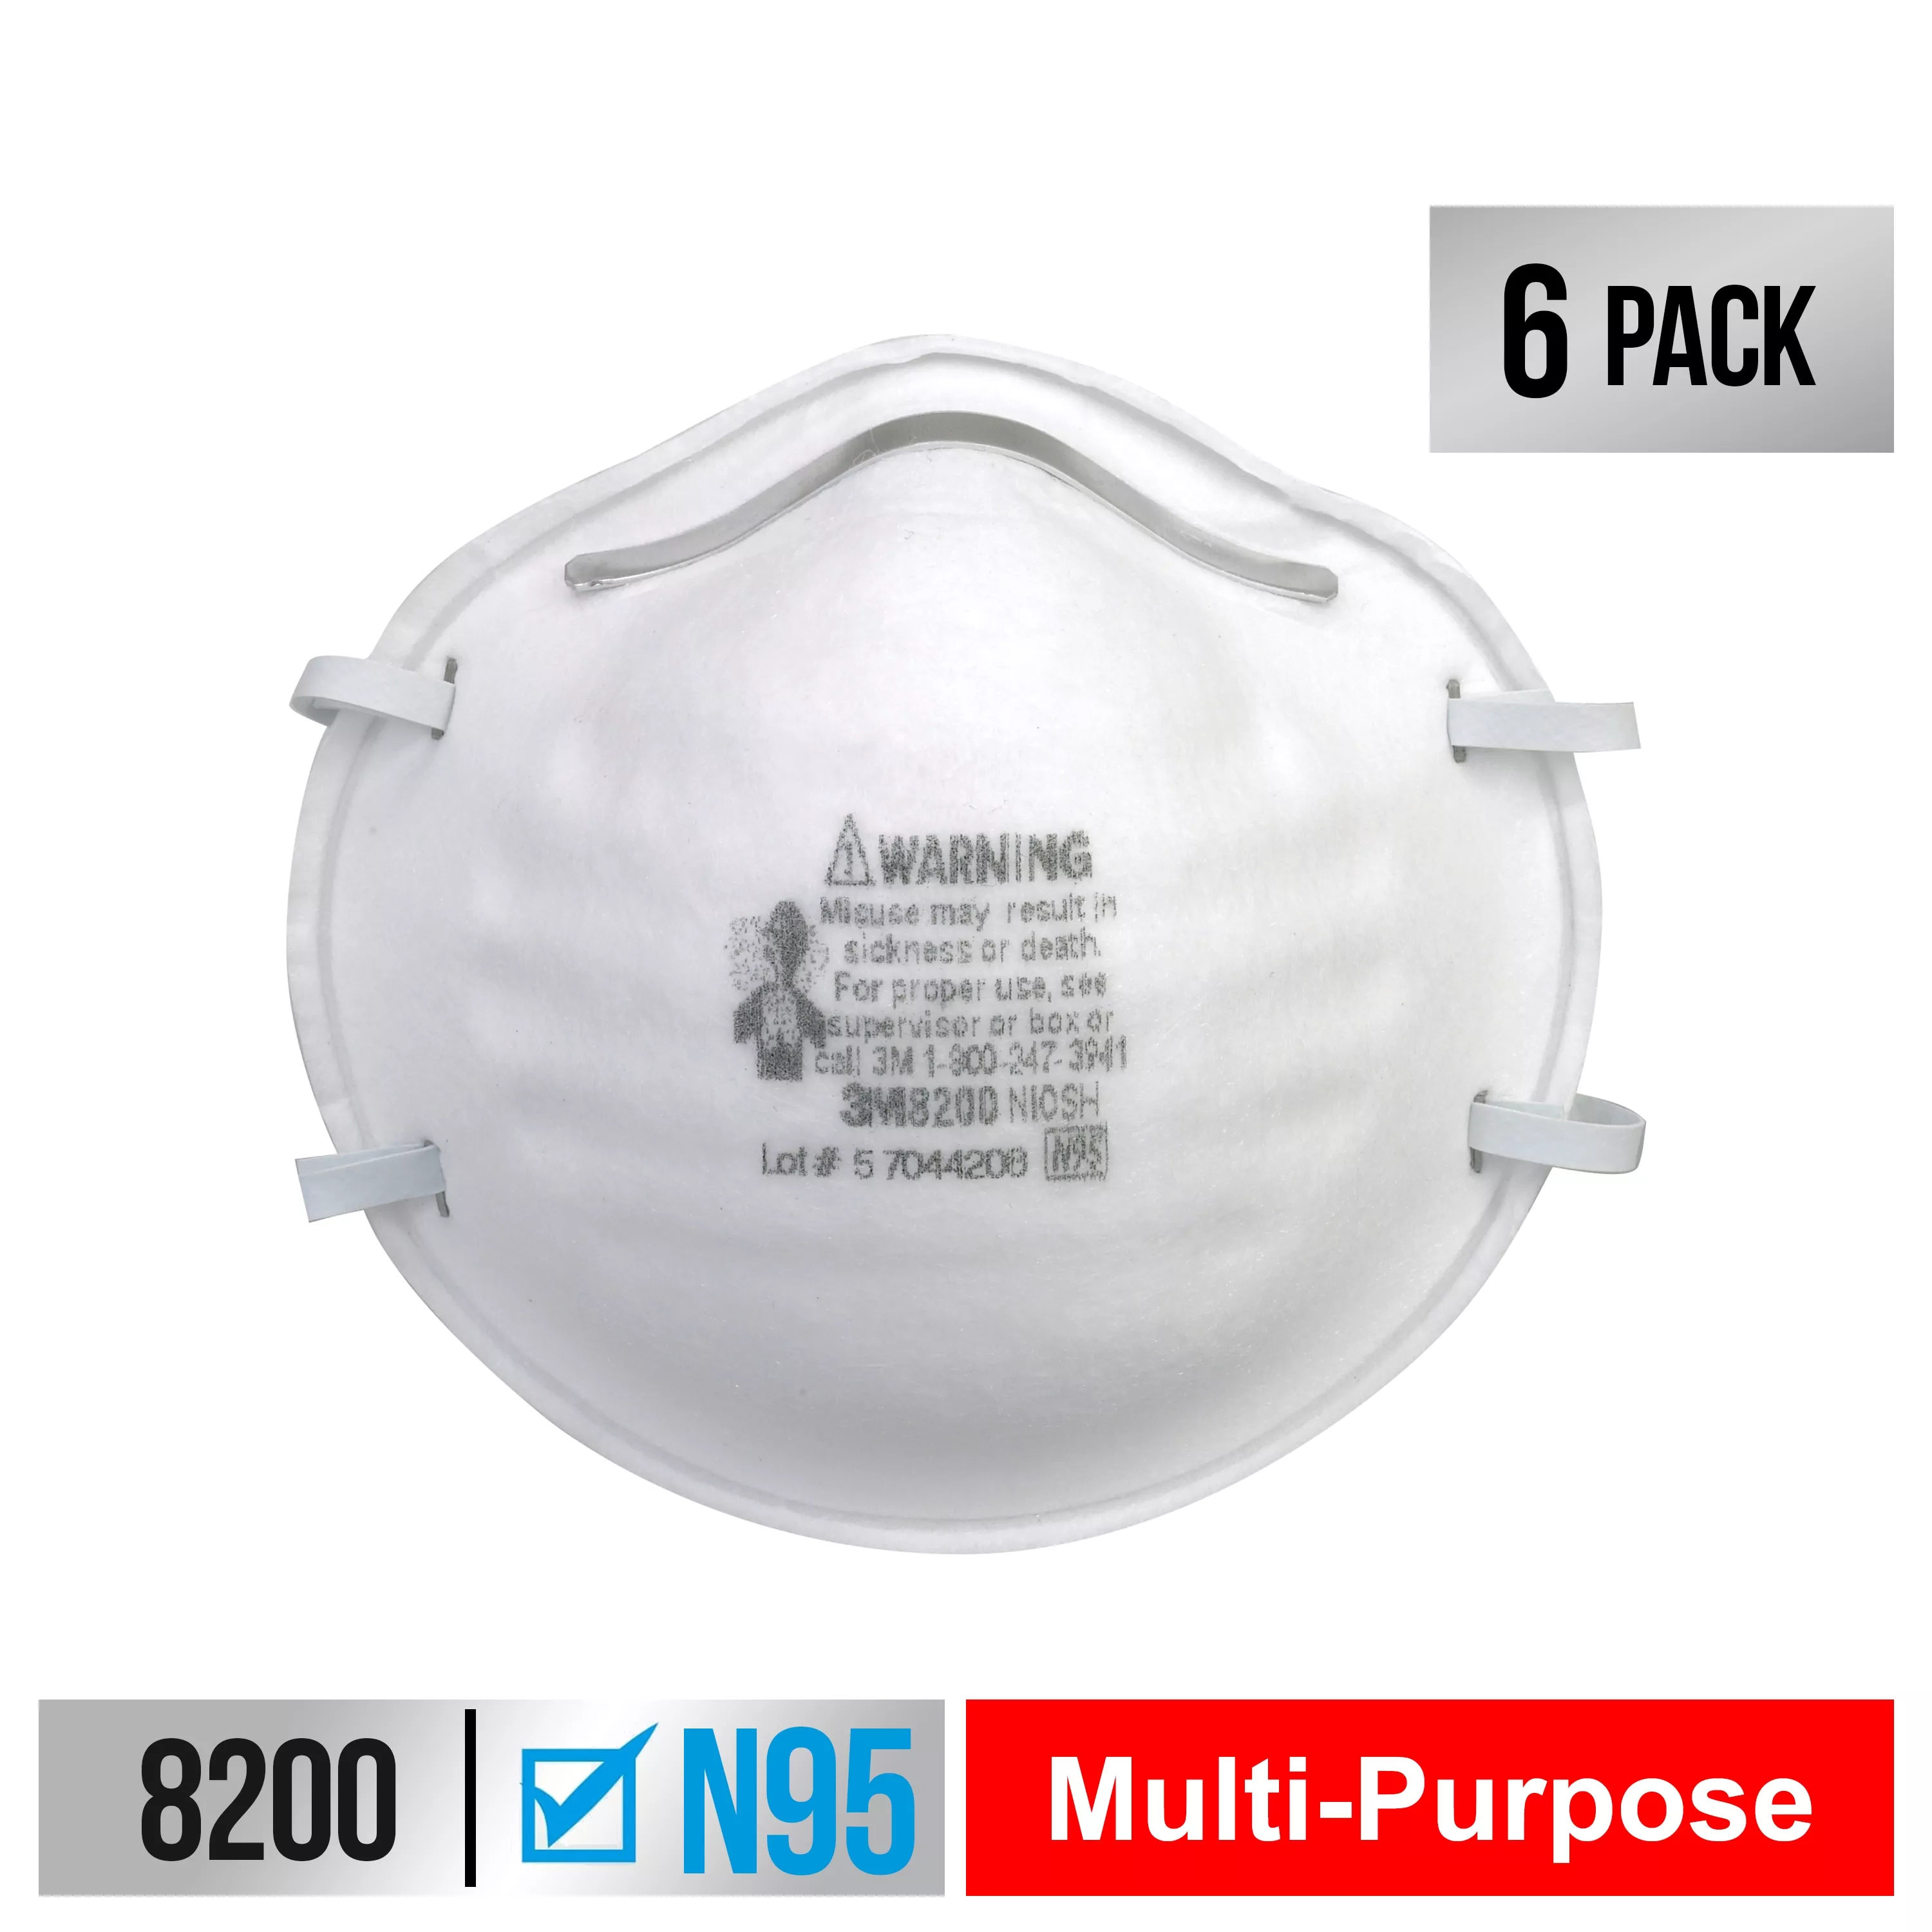 3M™ Sanding and Fiberglass Respirator N95 Particulate, 8200H6-DC, 6
eaches/pack, 6 packs/case